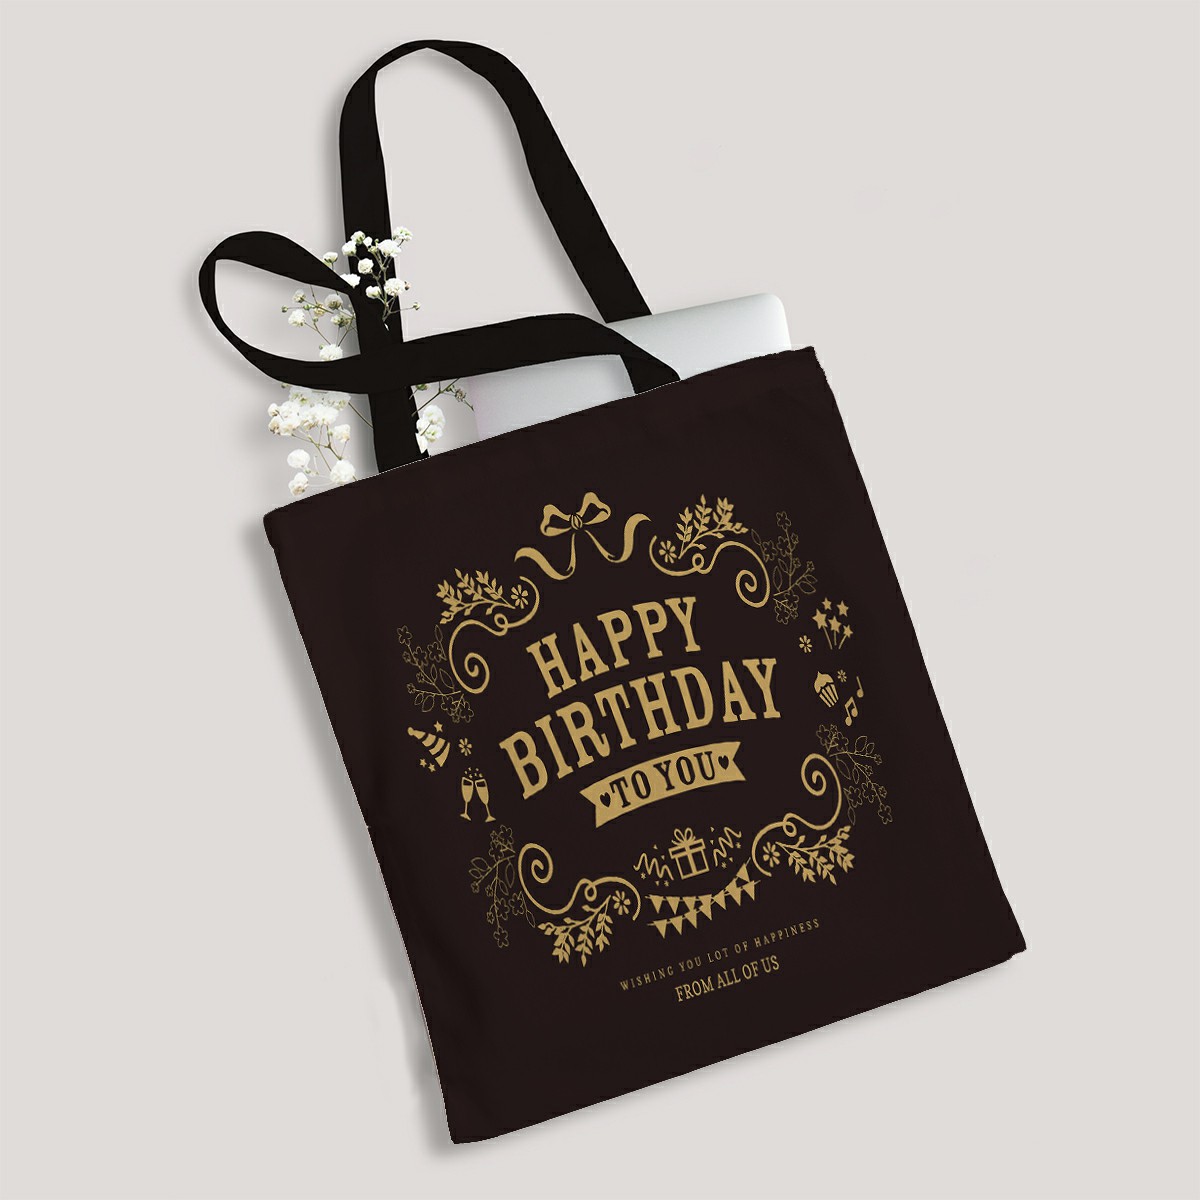 ECZJNT Birthday card design Canvas Bag Reusable Tote Grocery Shopping Bags Tote Bag 14"(W) x 16"(H) - image 1 of 1